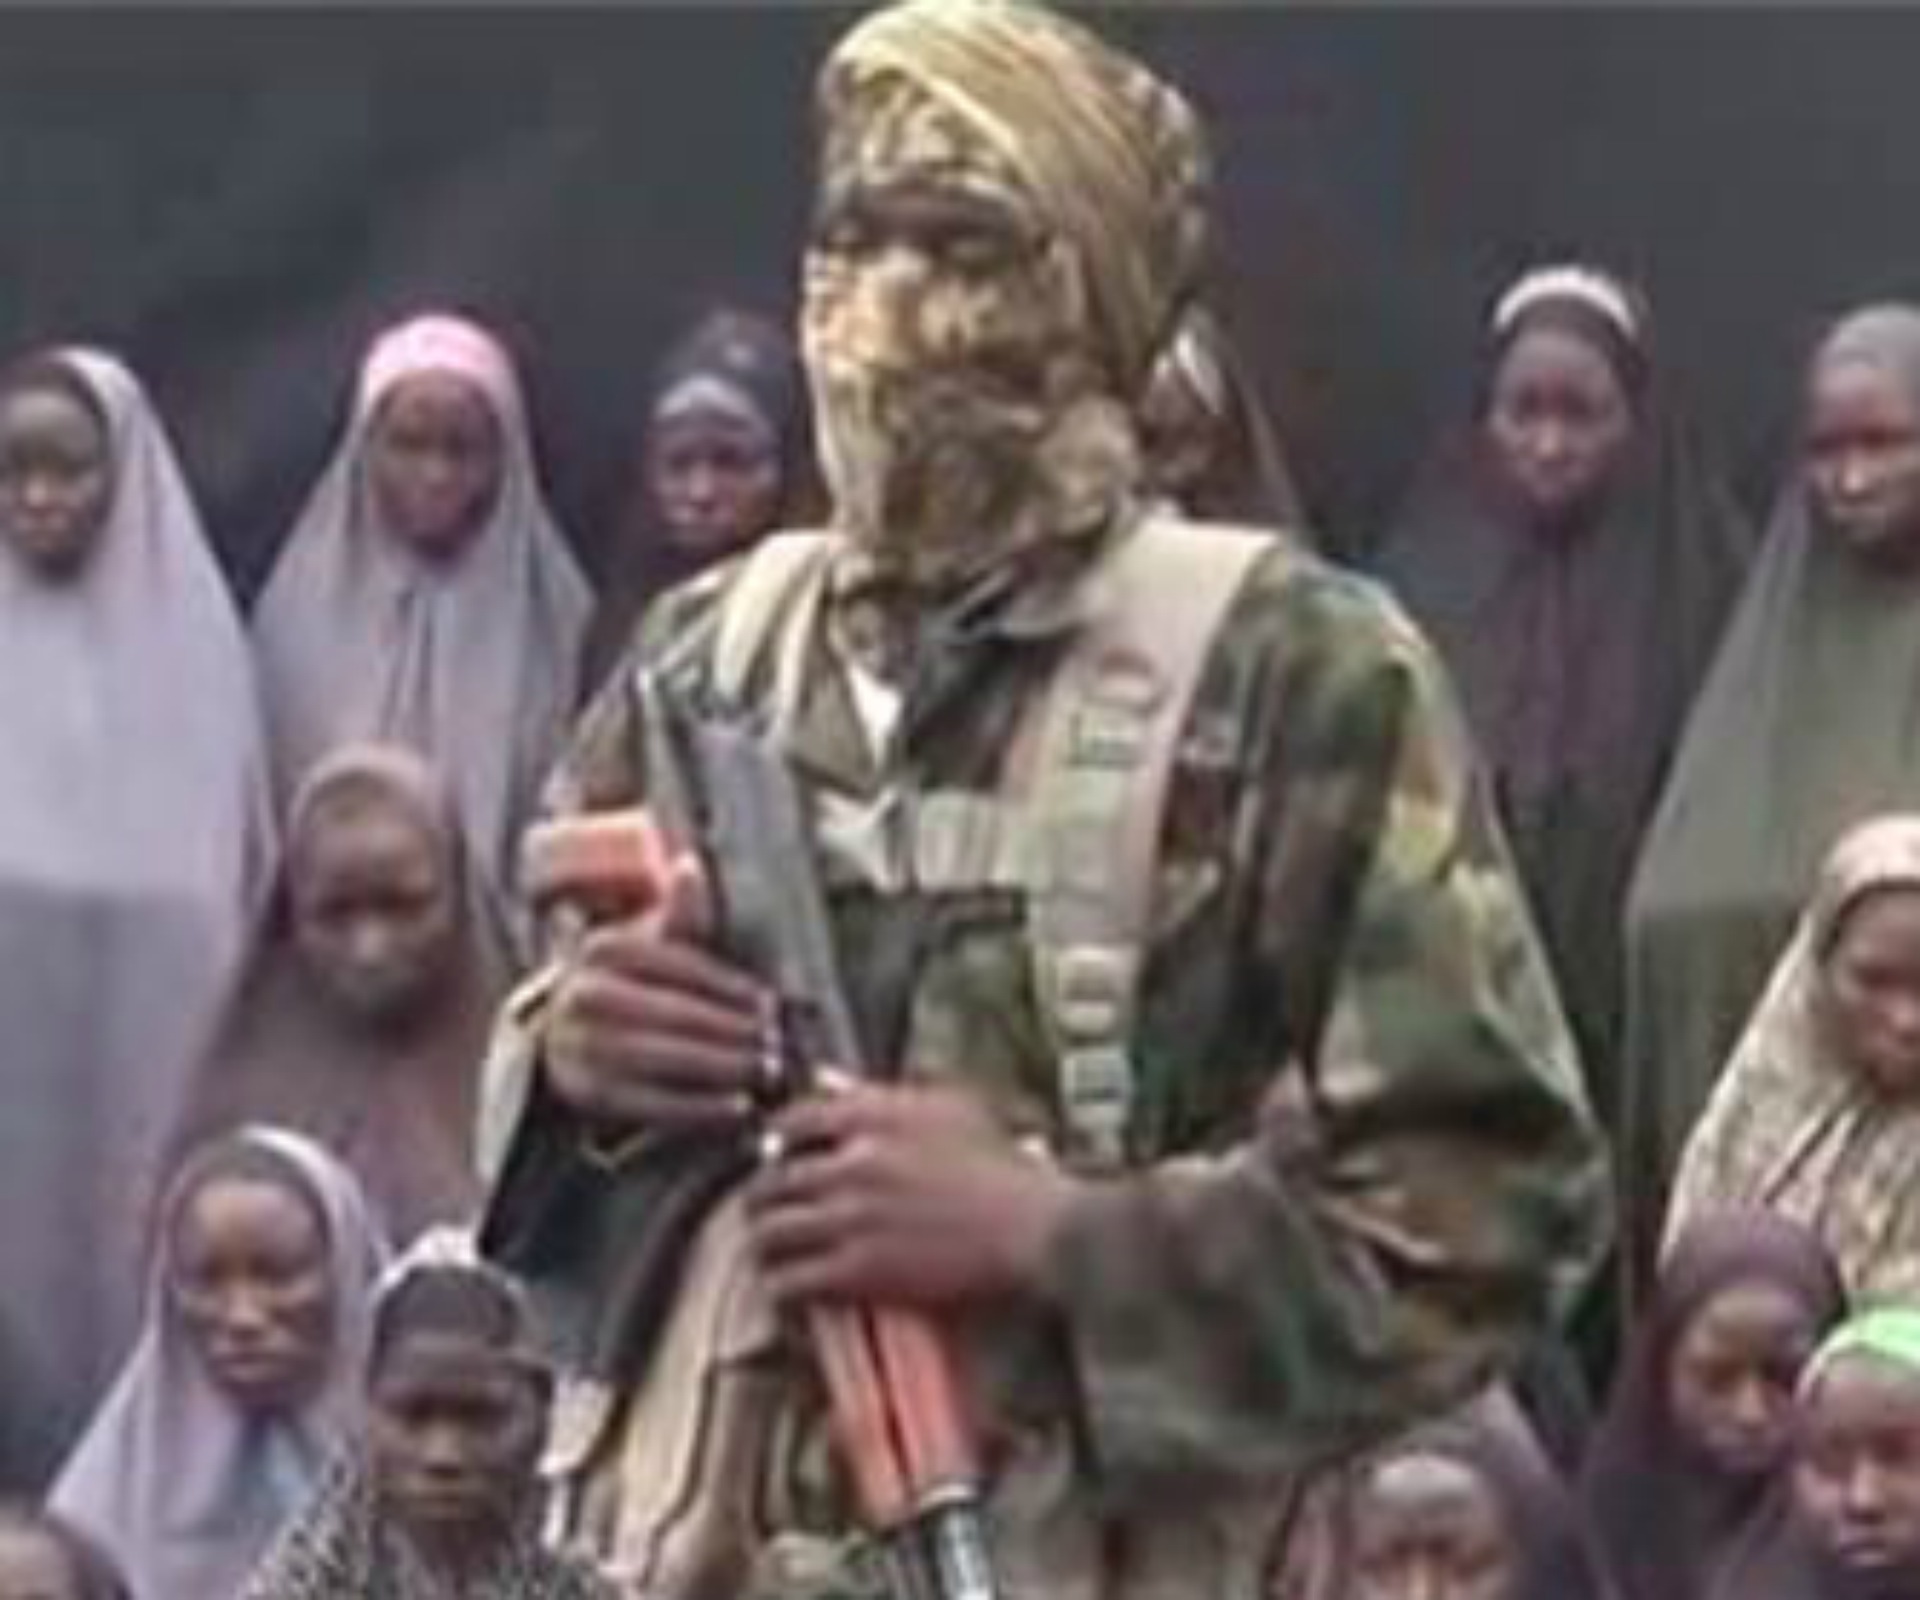 Heartbroken parents identify their kidnapped daughters taken by Boko Haram